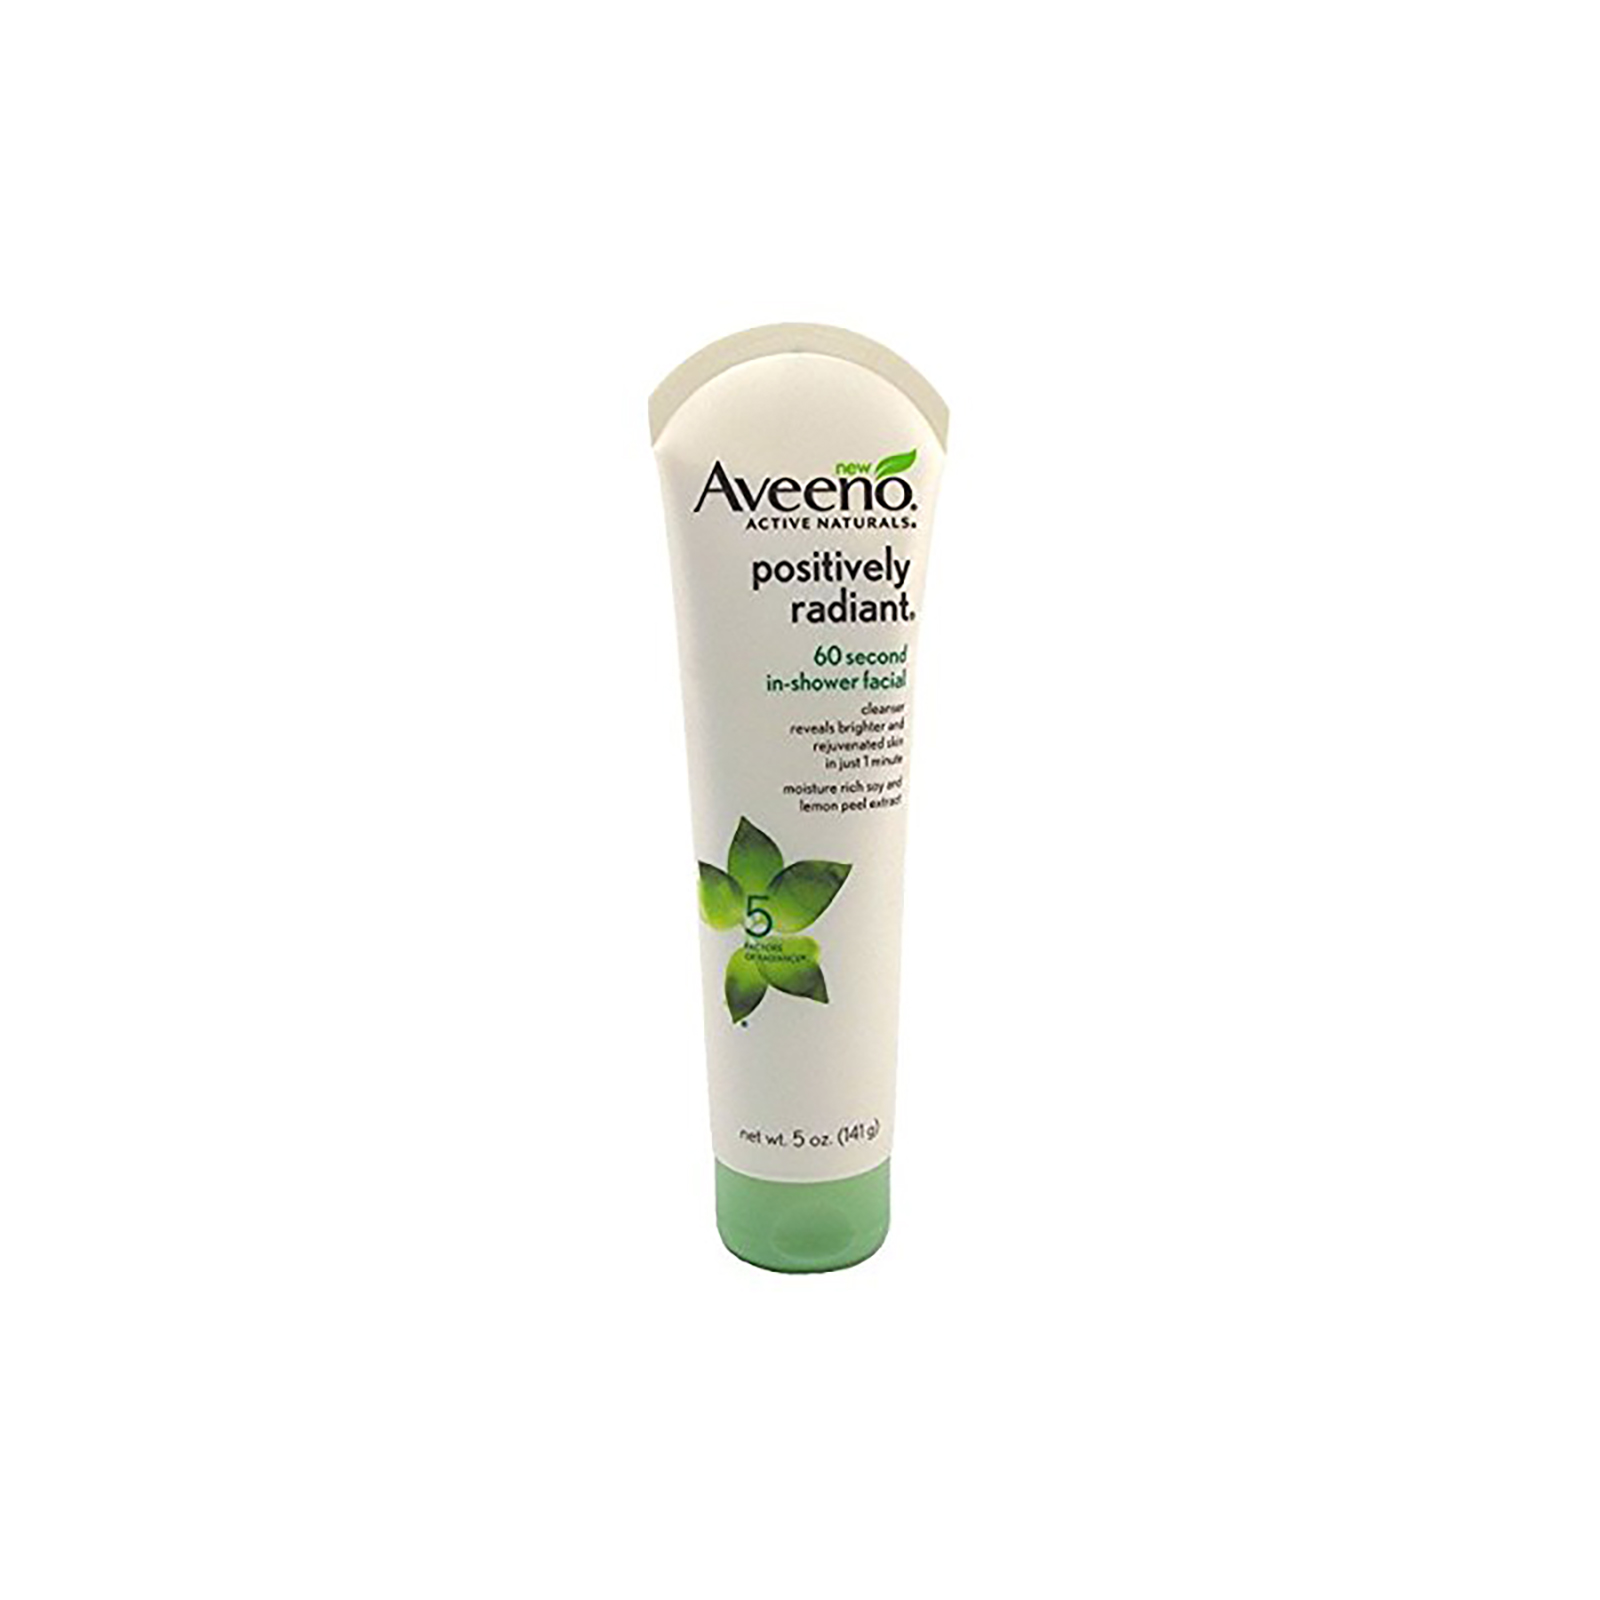 Aveeno Positively Radiant 60-Second In-Shower Facial